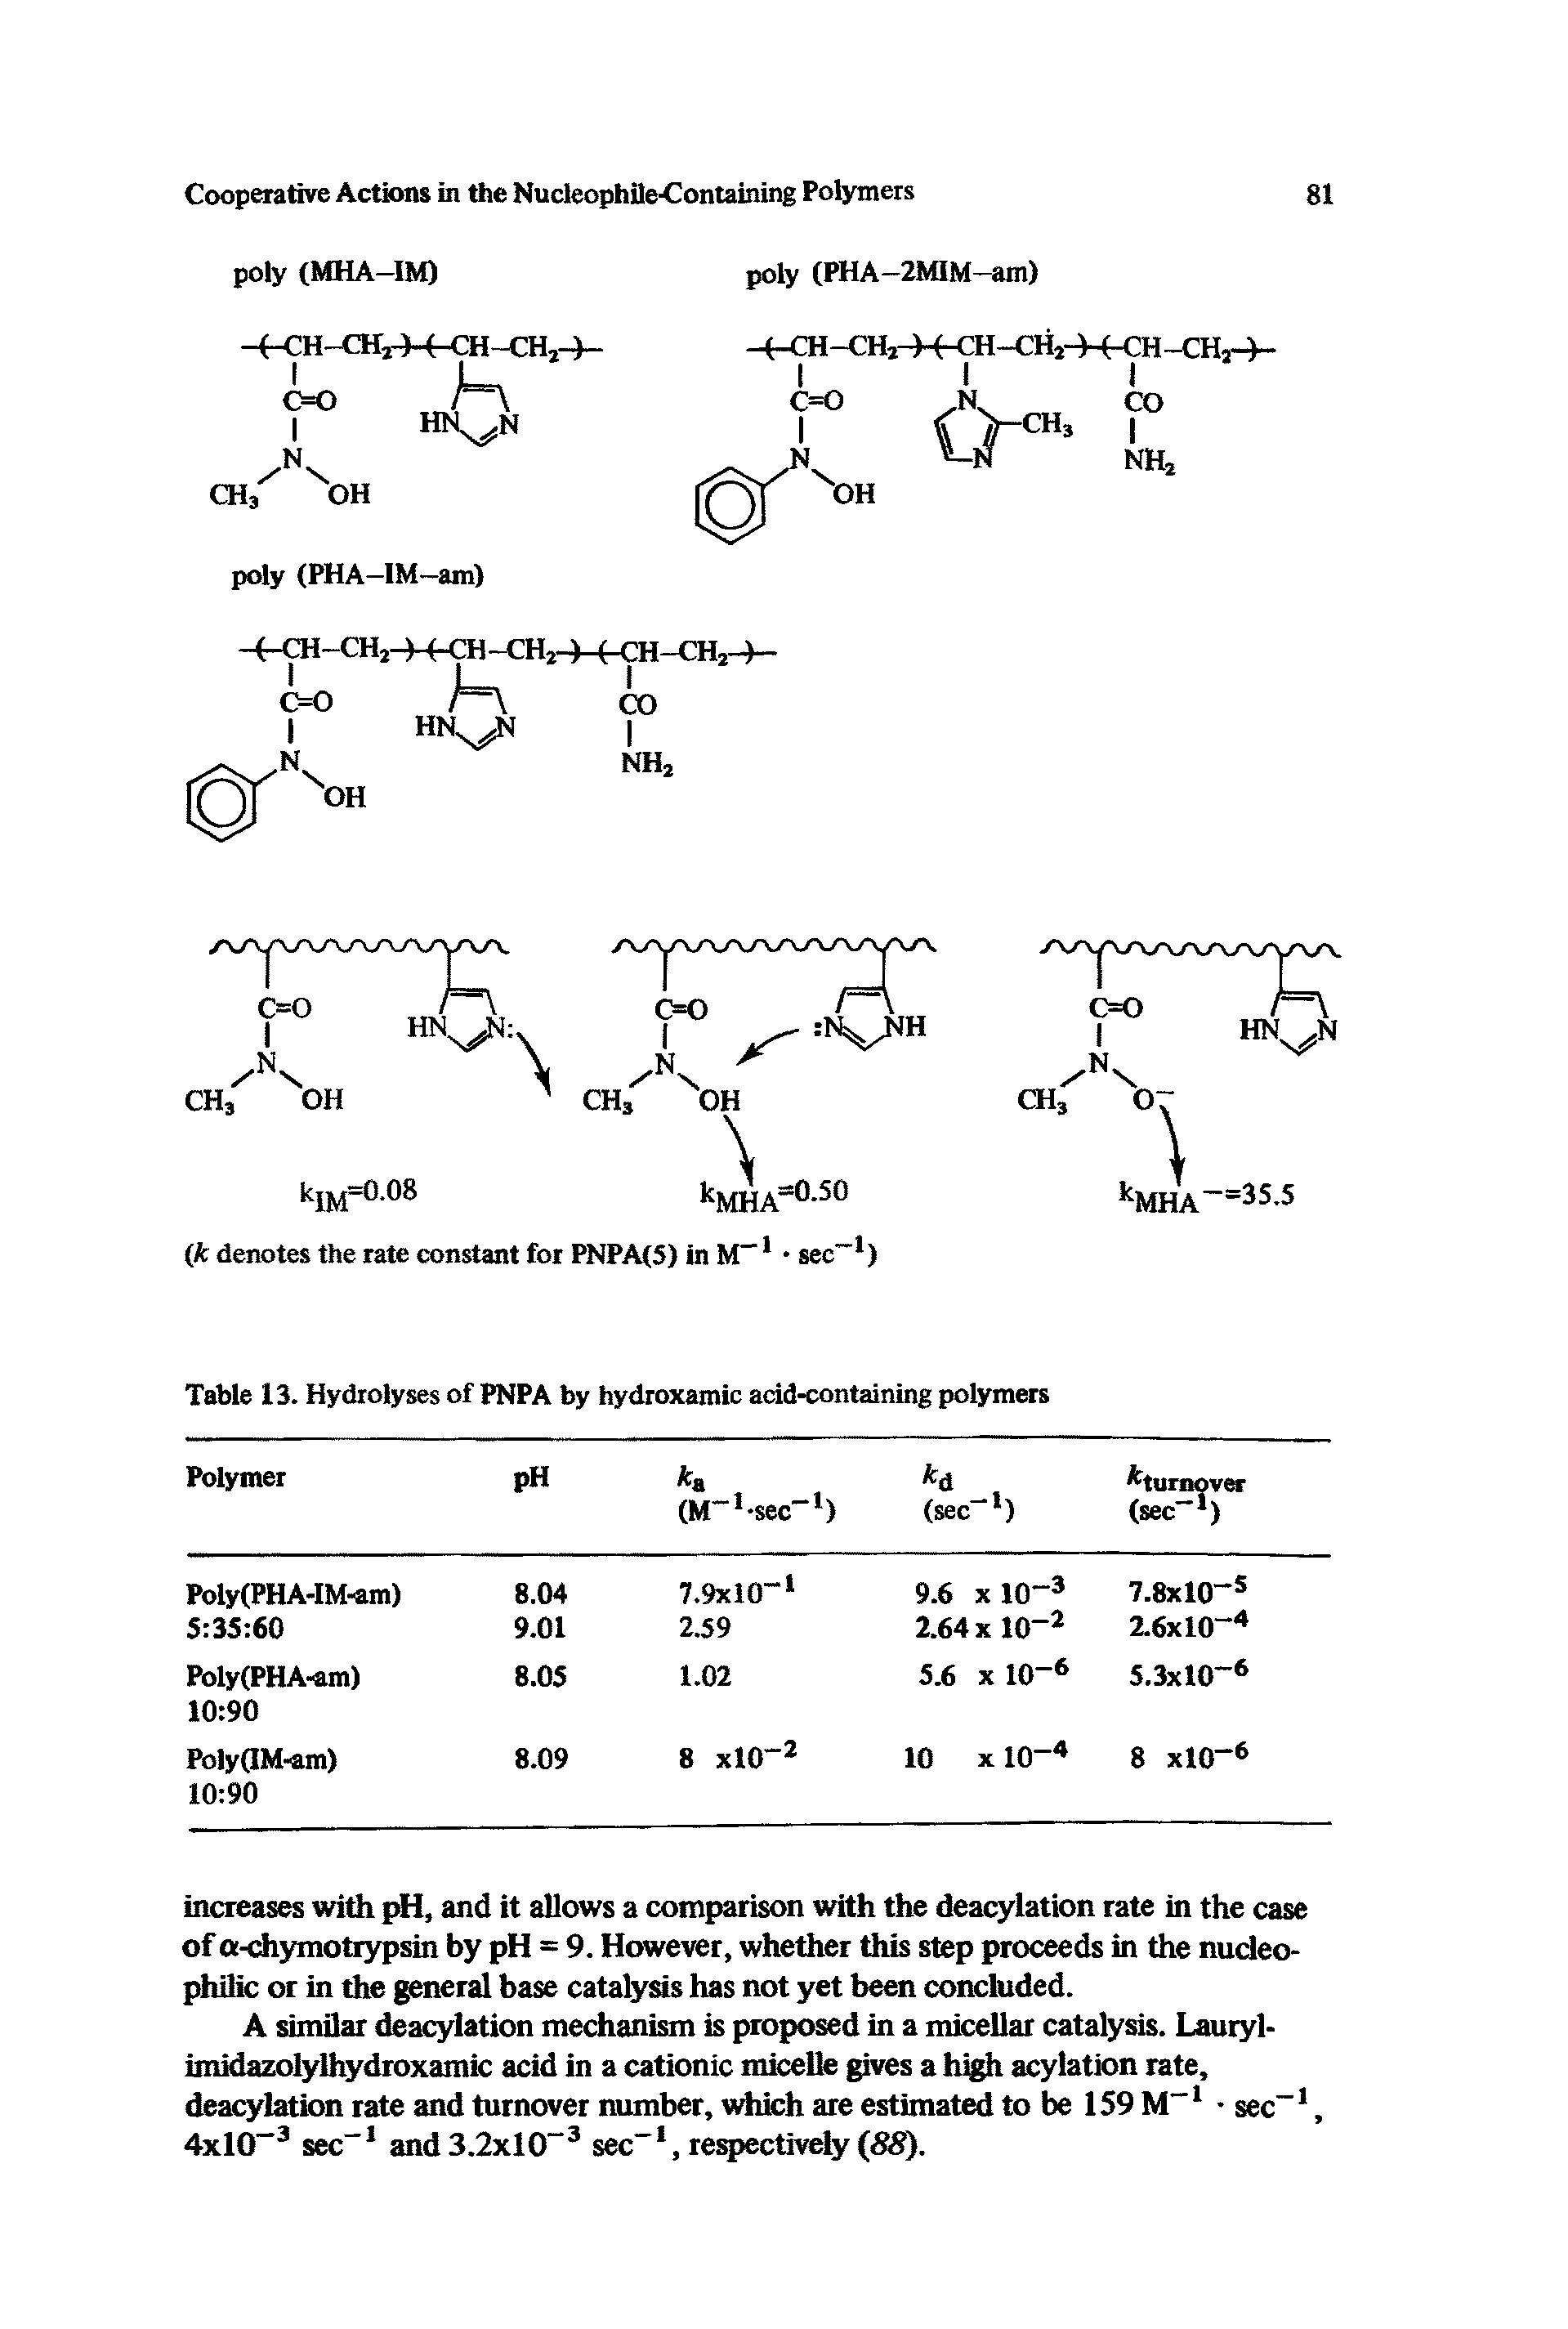 Table 13. Hydrolyses of PNPA by hydroxamic acid-containing polymers...